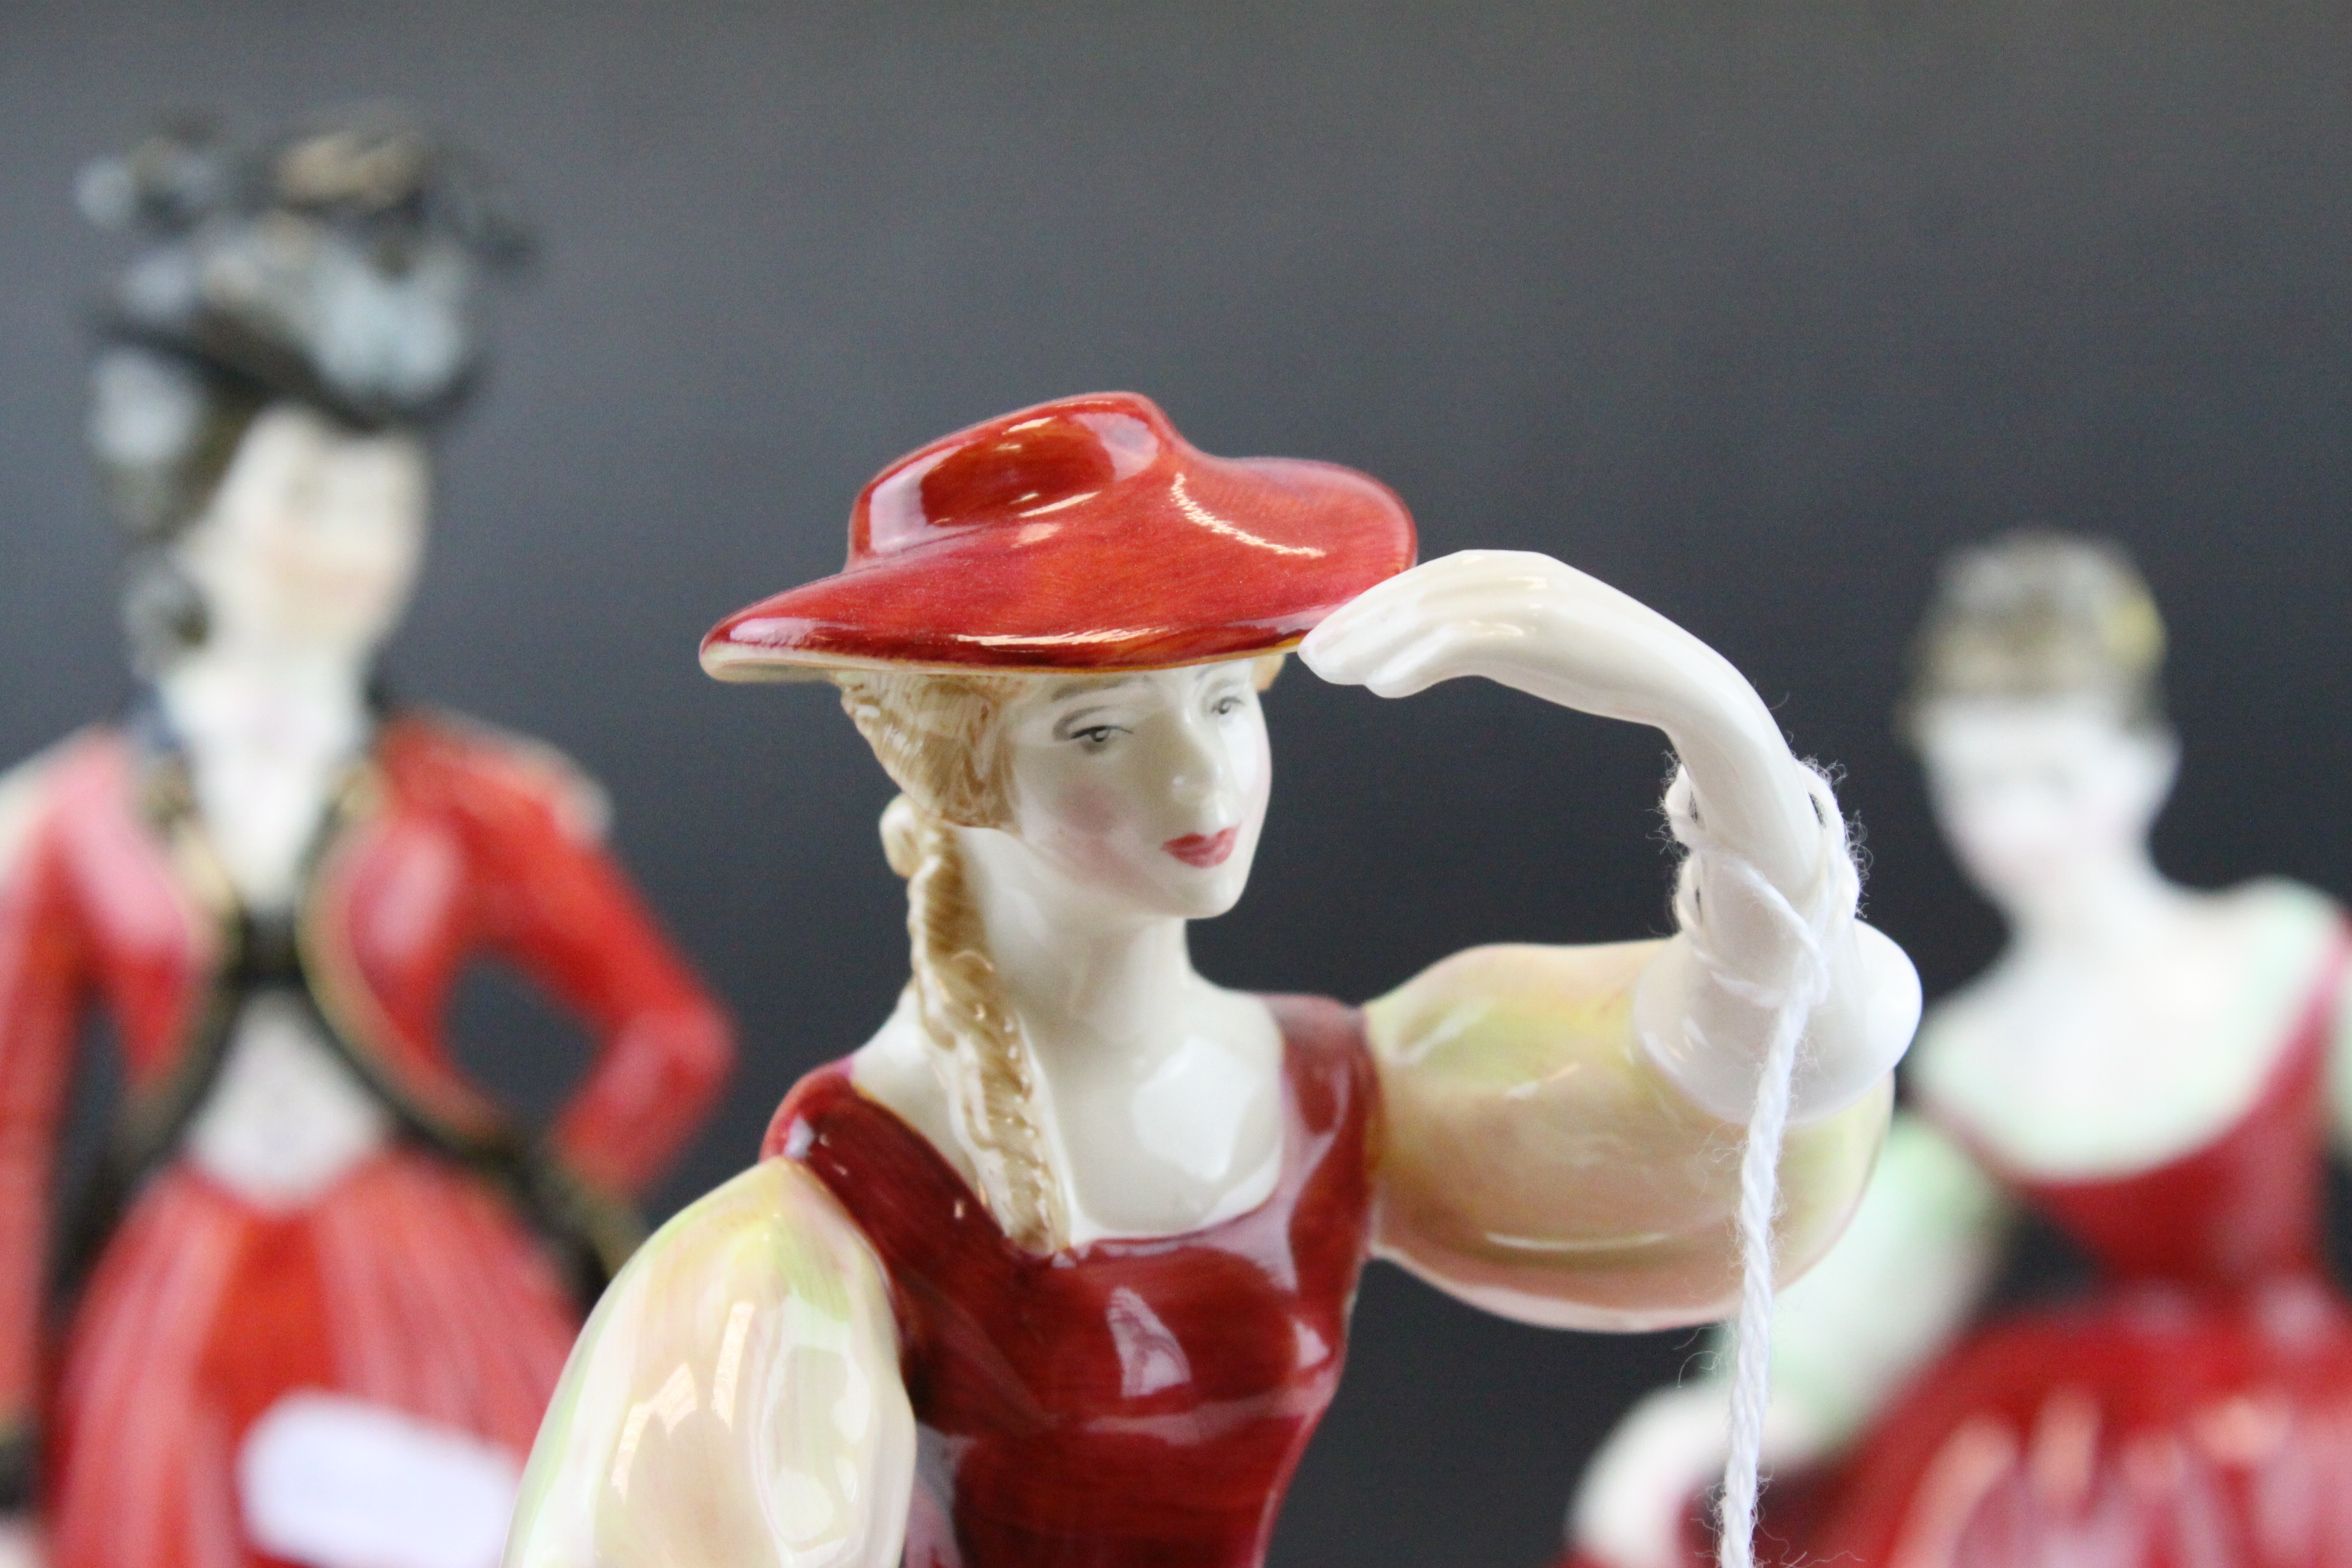 Three Royal Doulton Figurines - Buttercup, Fair Lady and Lady Worsley ( limited edition no. 512 ) - Image 3 of 10